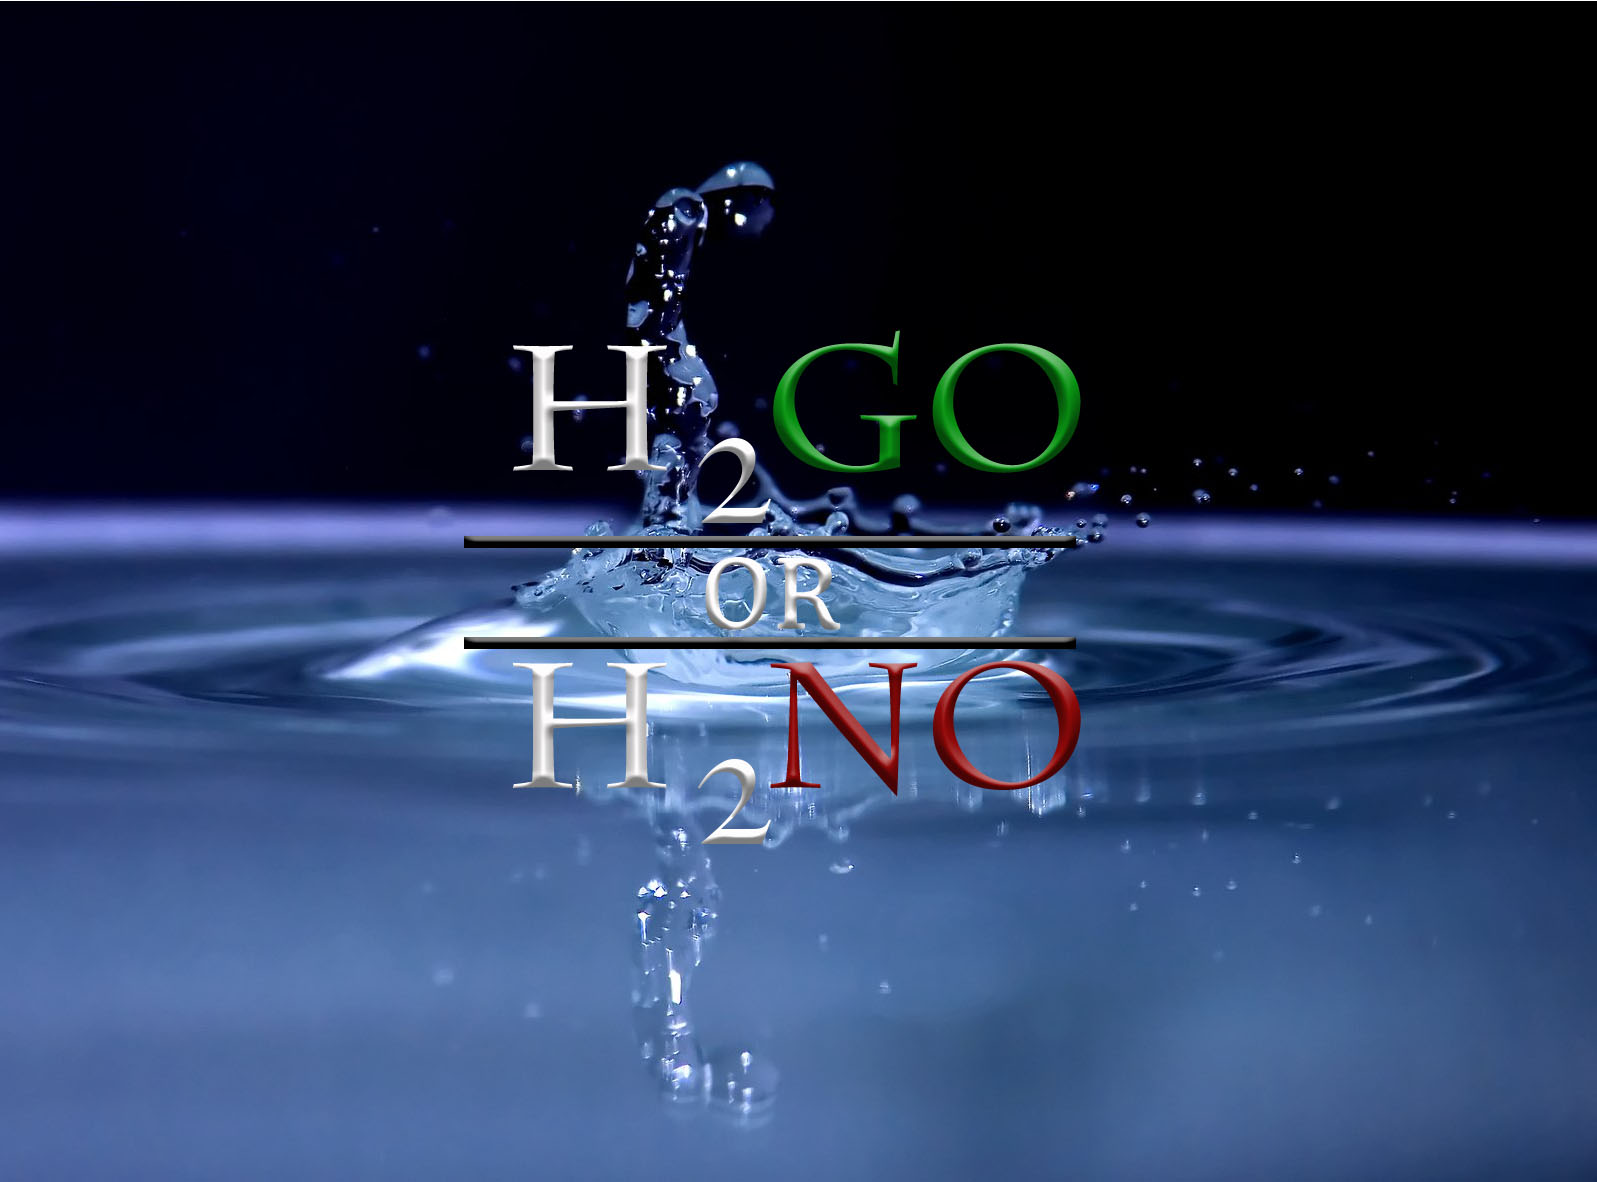 Water photo depicting the title H2NO or H2GO.